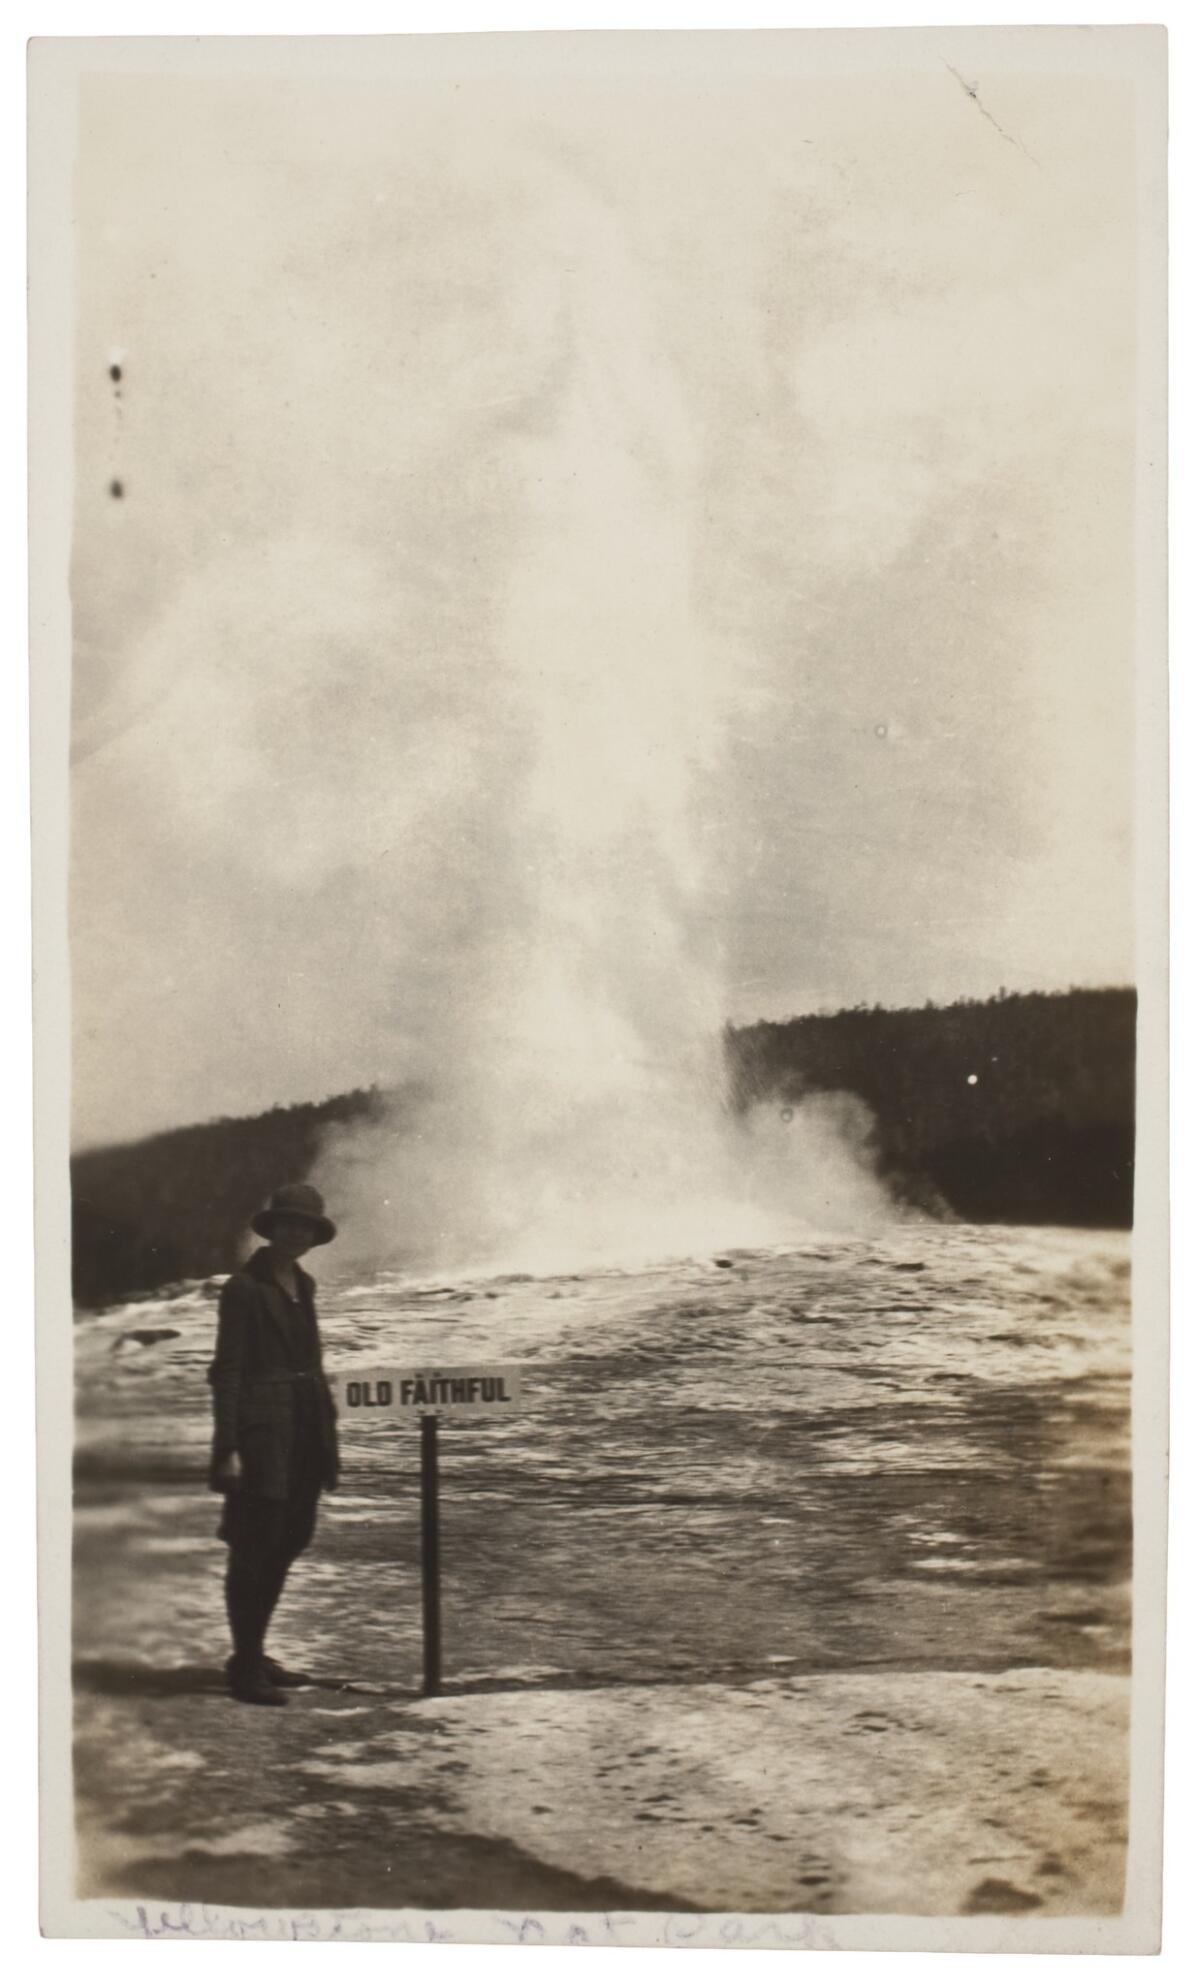 Photographer unkown, Old Faithful Geyser, Yellowstone National Park, ca. 1915 (Image courtesy of George Eastman Museum, Gift of Peter J. Cohen)